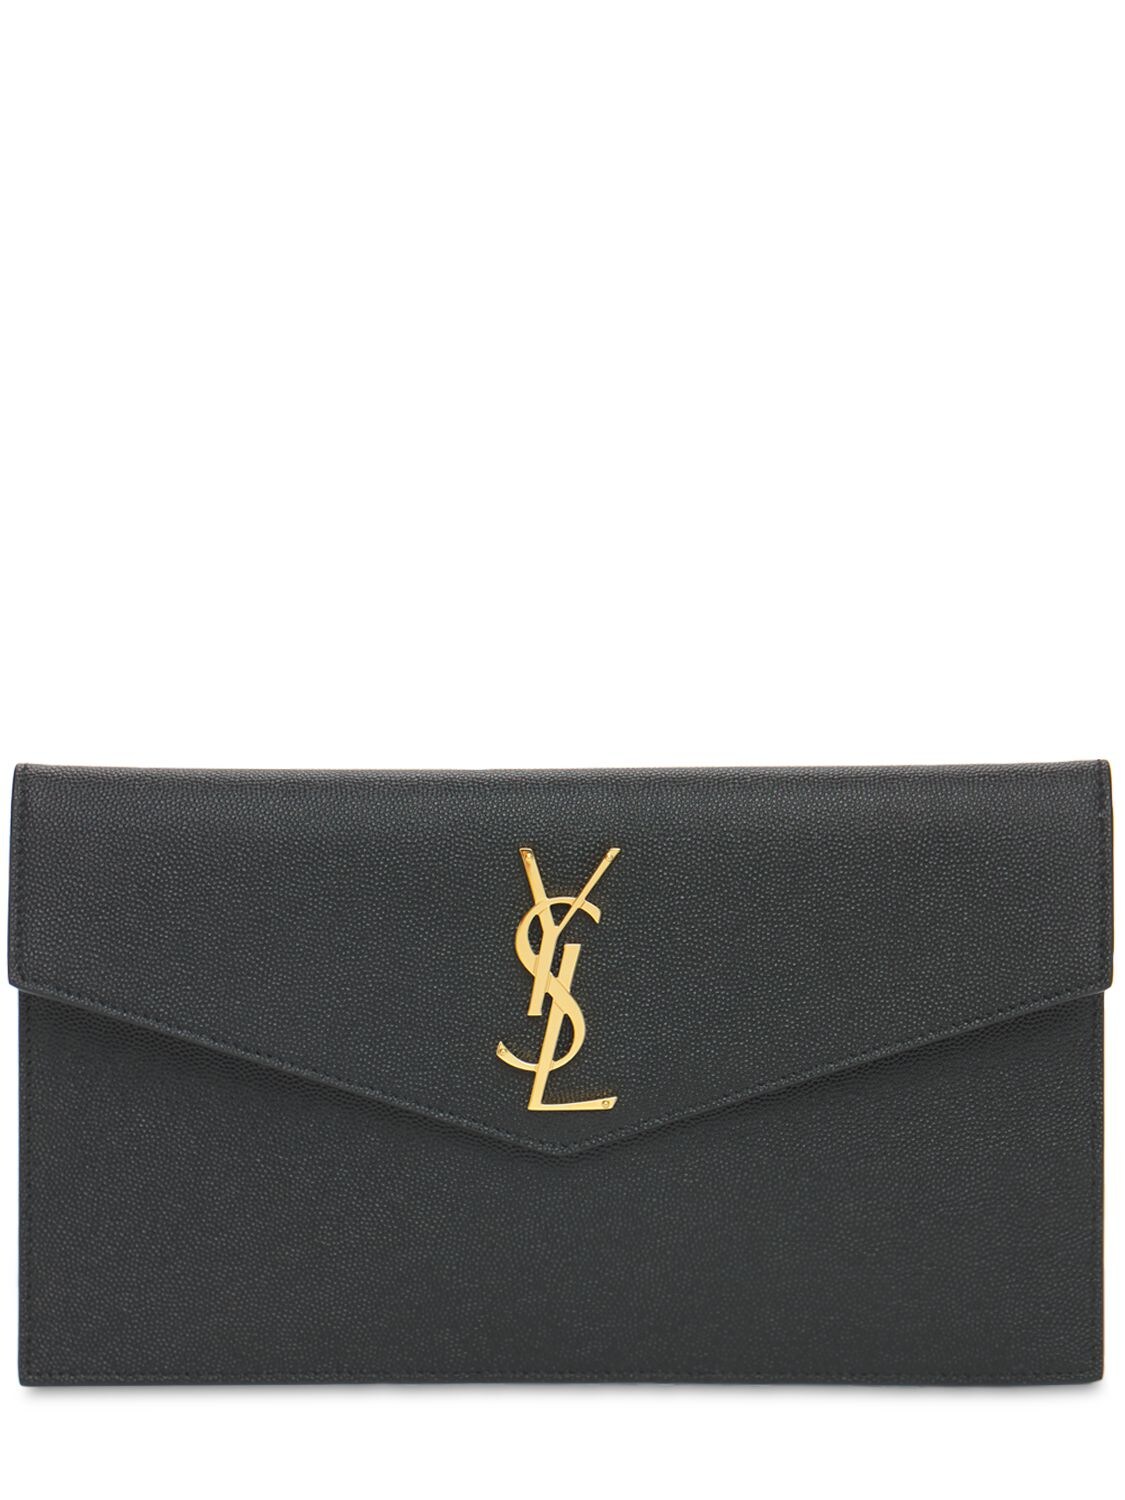 Image of Medium Uptown Monogram Leather Pouch